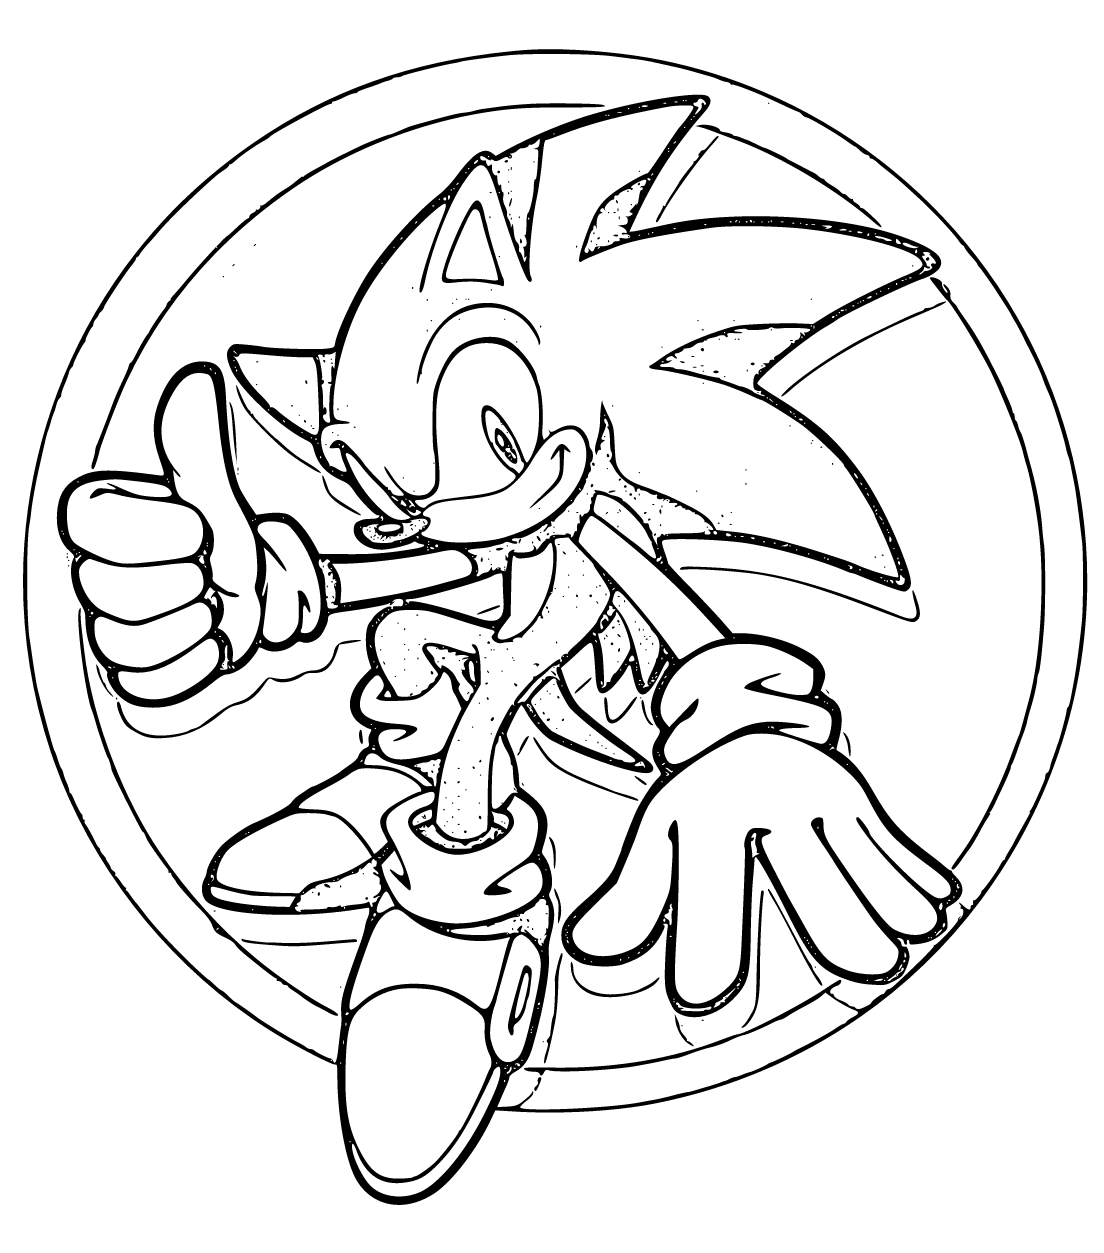 Printable Sonic thumbs up Coloring Page for kids.